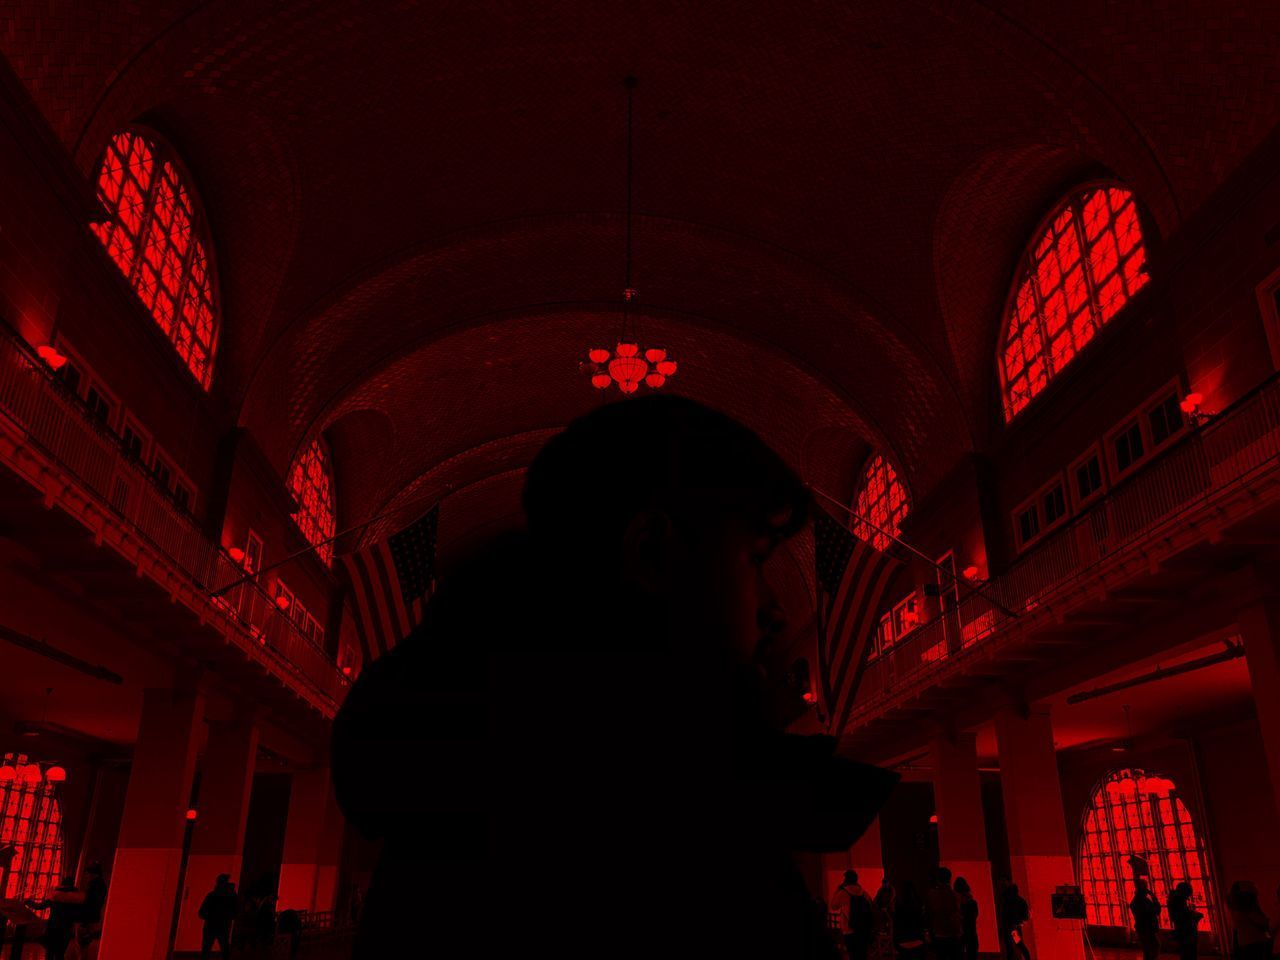 REAR VIEW OF SILHOUETTE WOMAN STANDING AT ILLUMINATED RED BUILDING